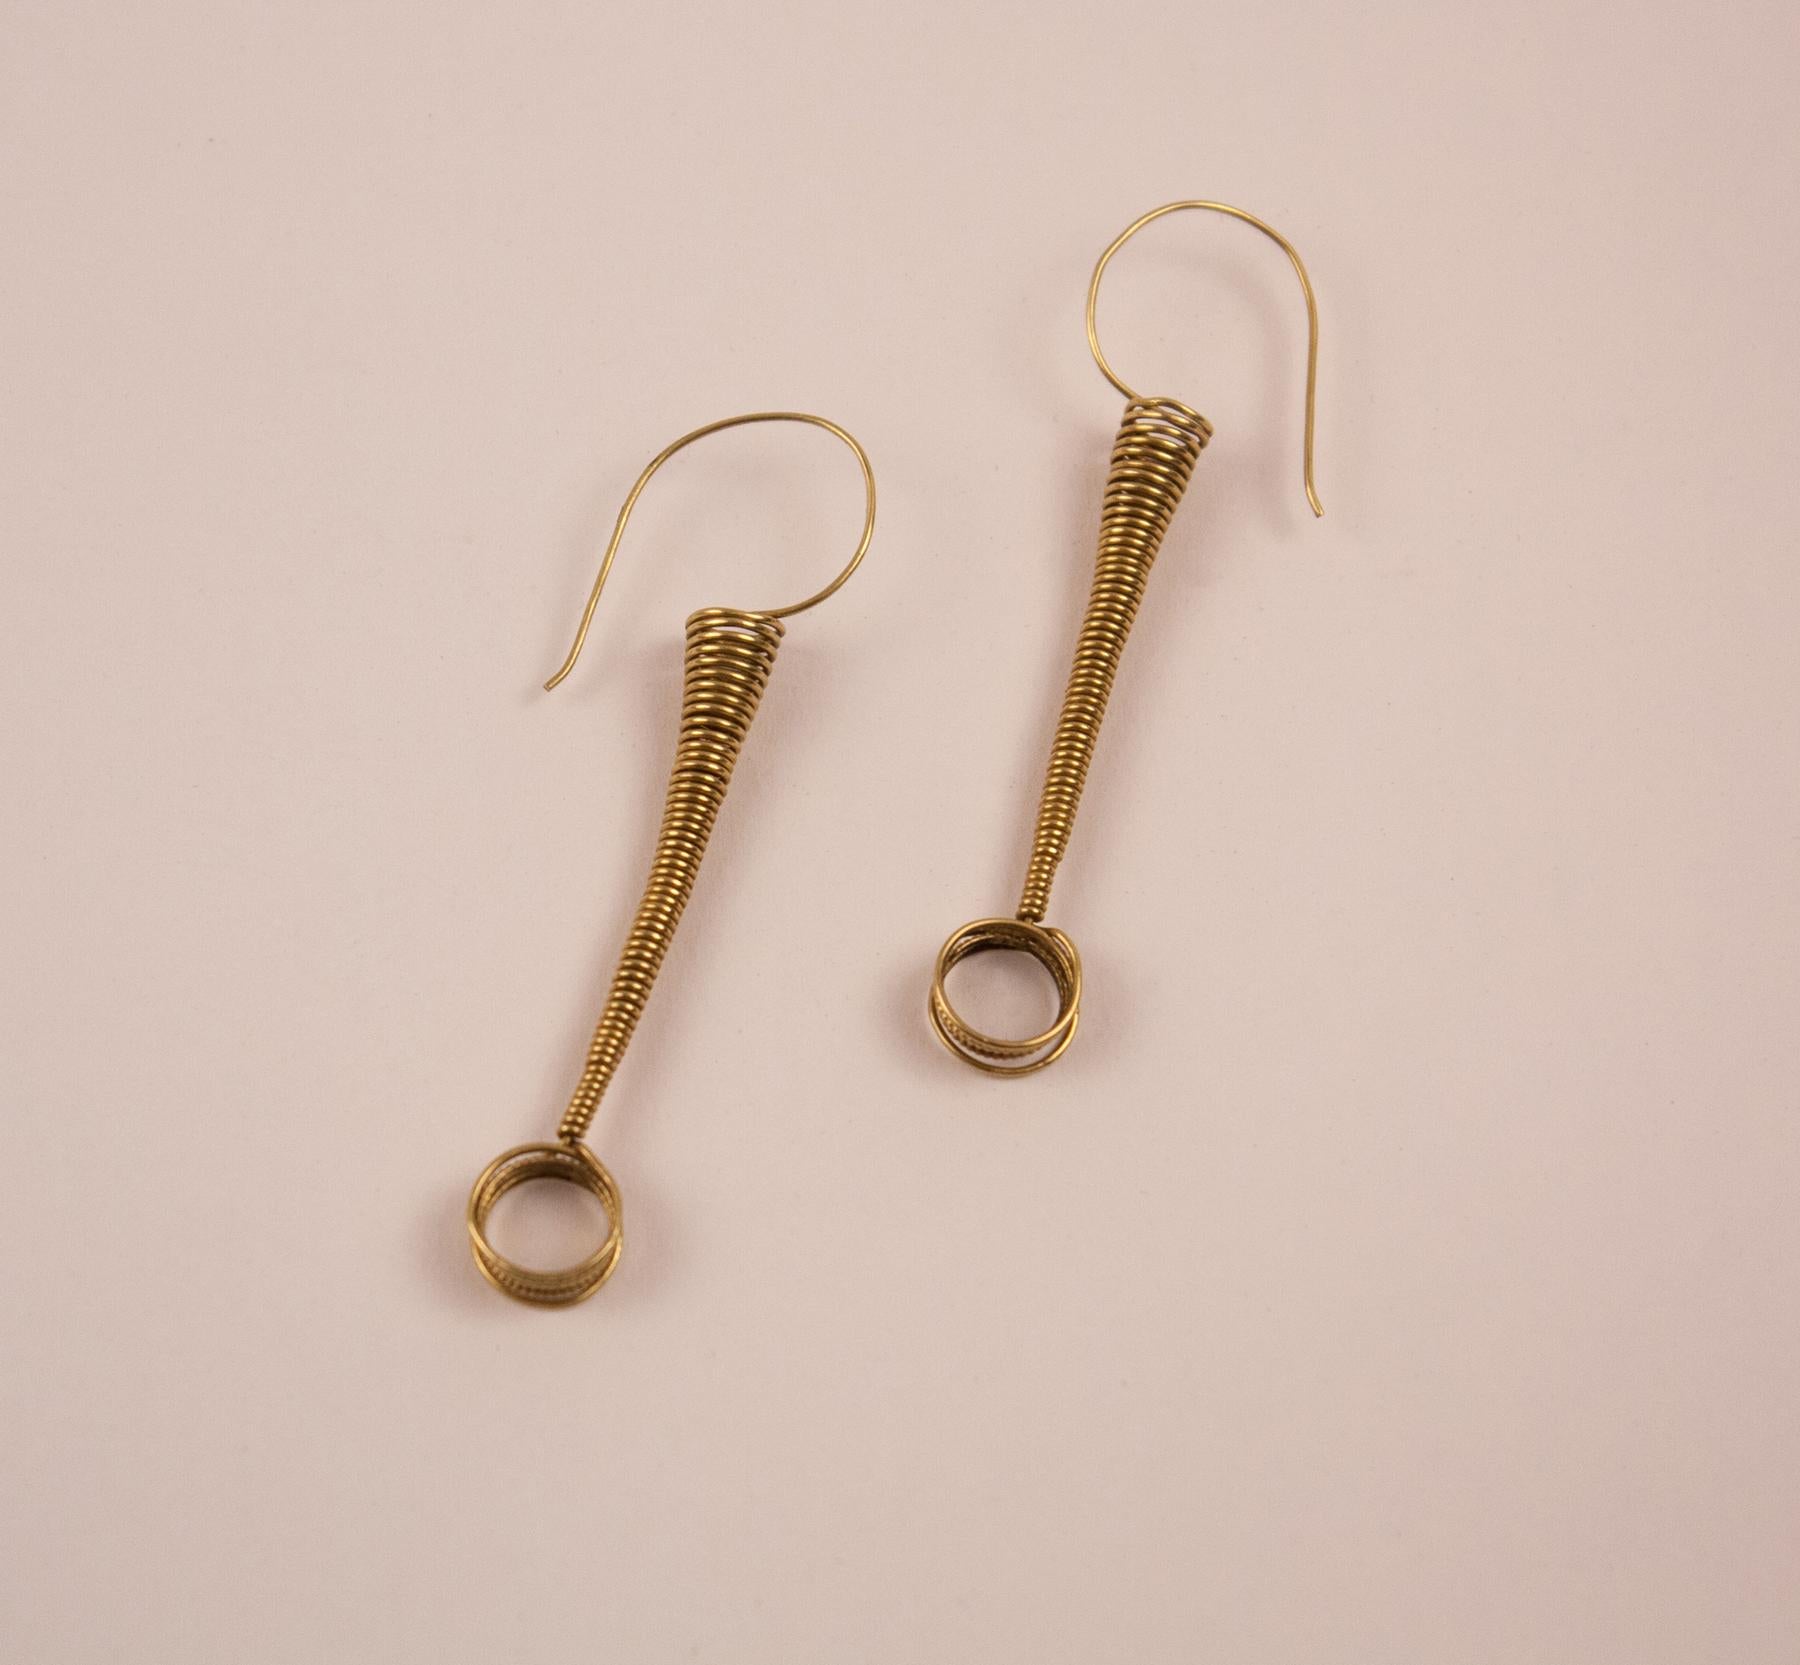 18 Karat Gold Coil Spring Wire Earrings In Excellent Condition For Sale In Heath, MA